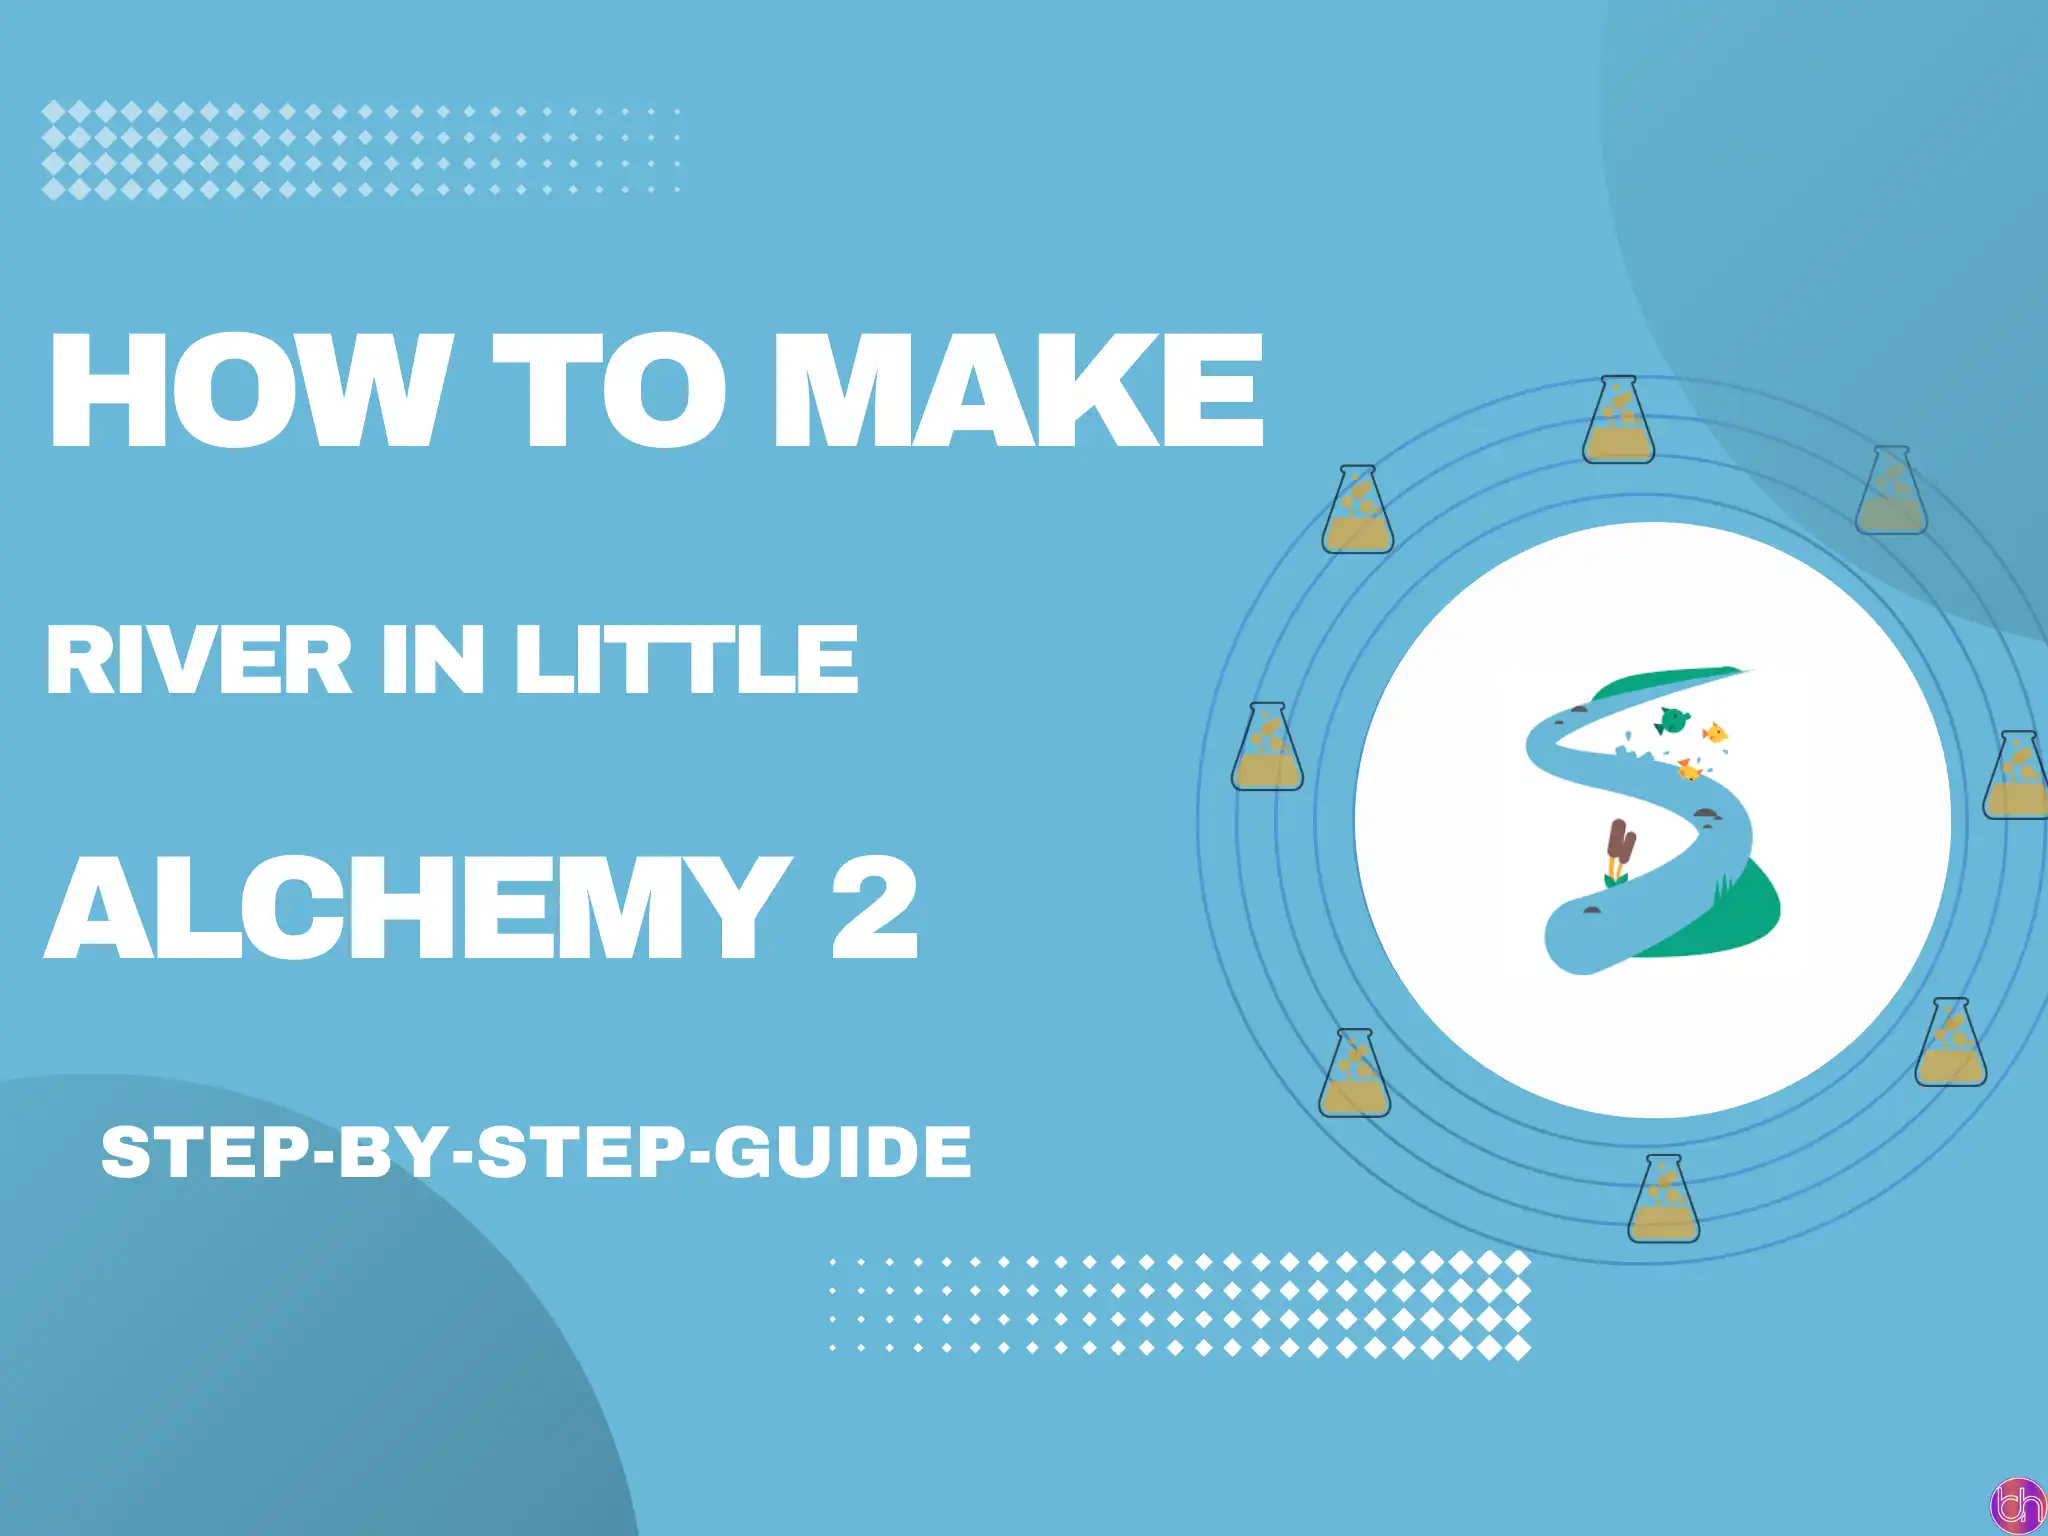 How to make River in Little Alchemy 2